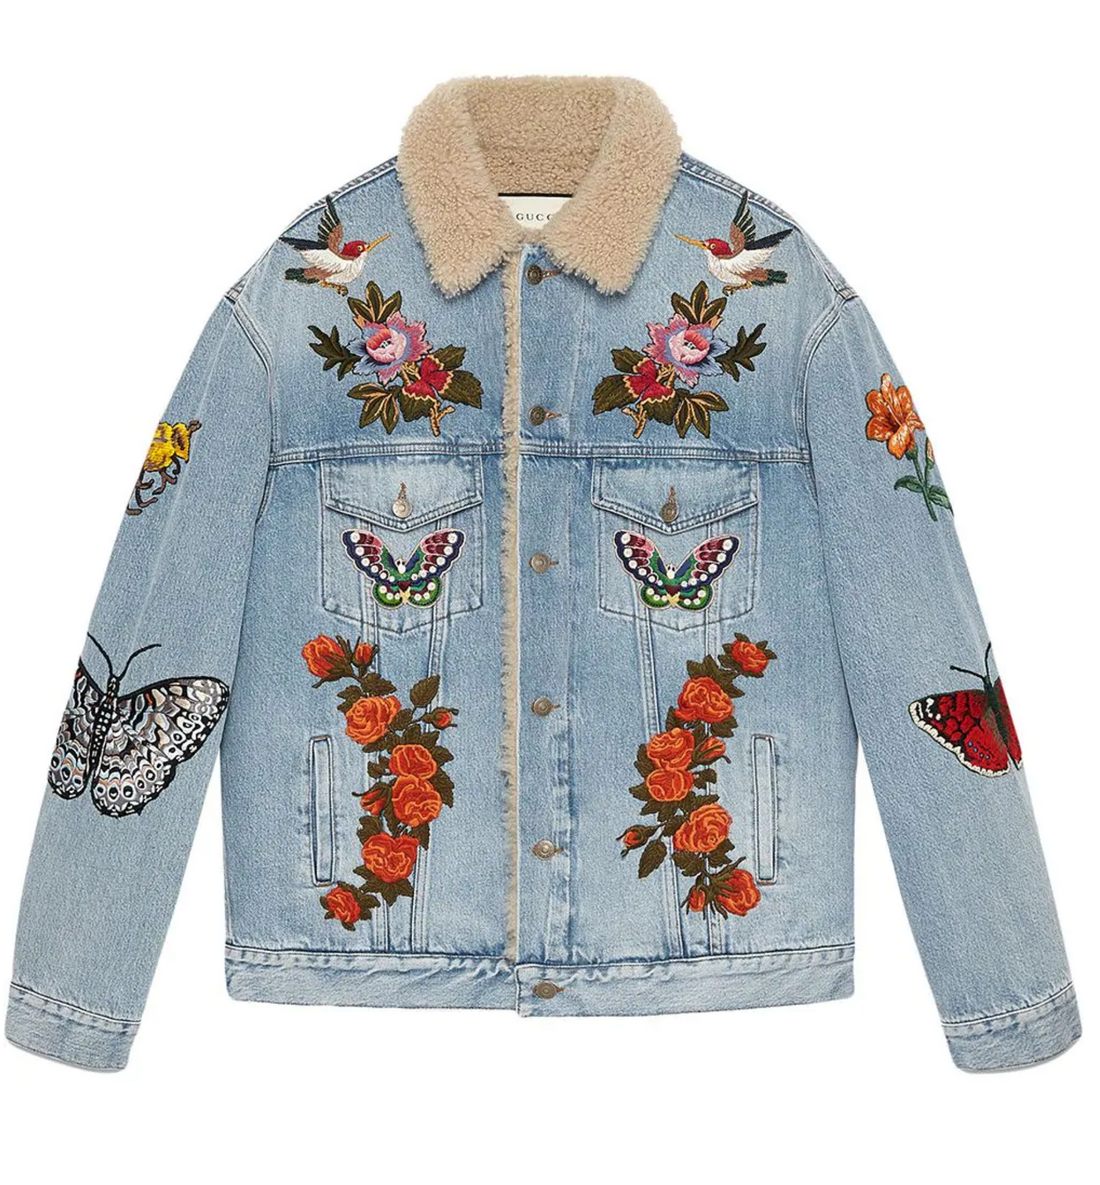 GucciI Shearling Lined Embroidered Denim